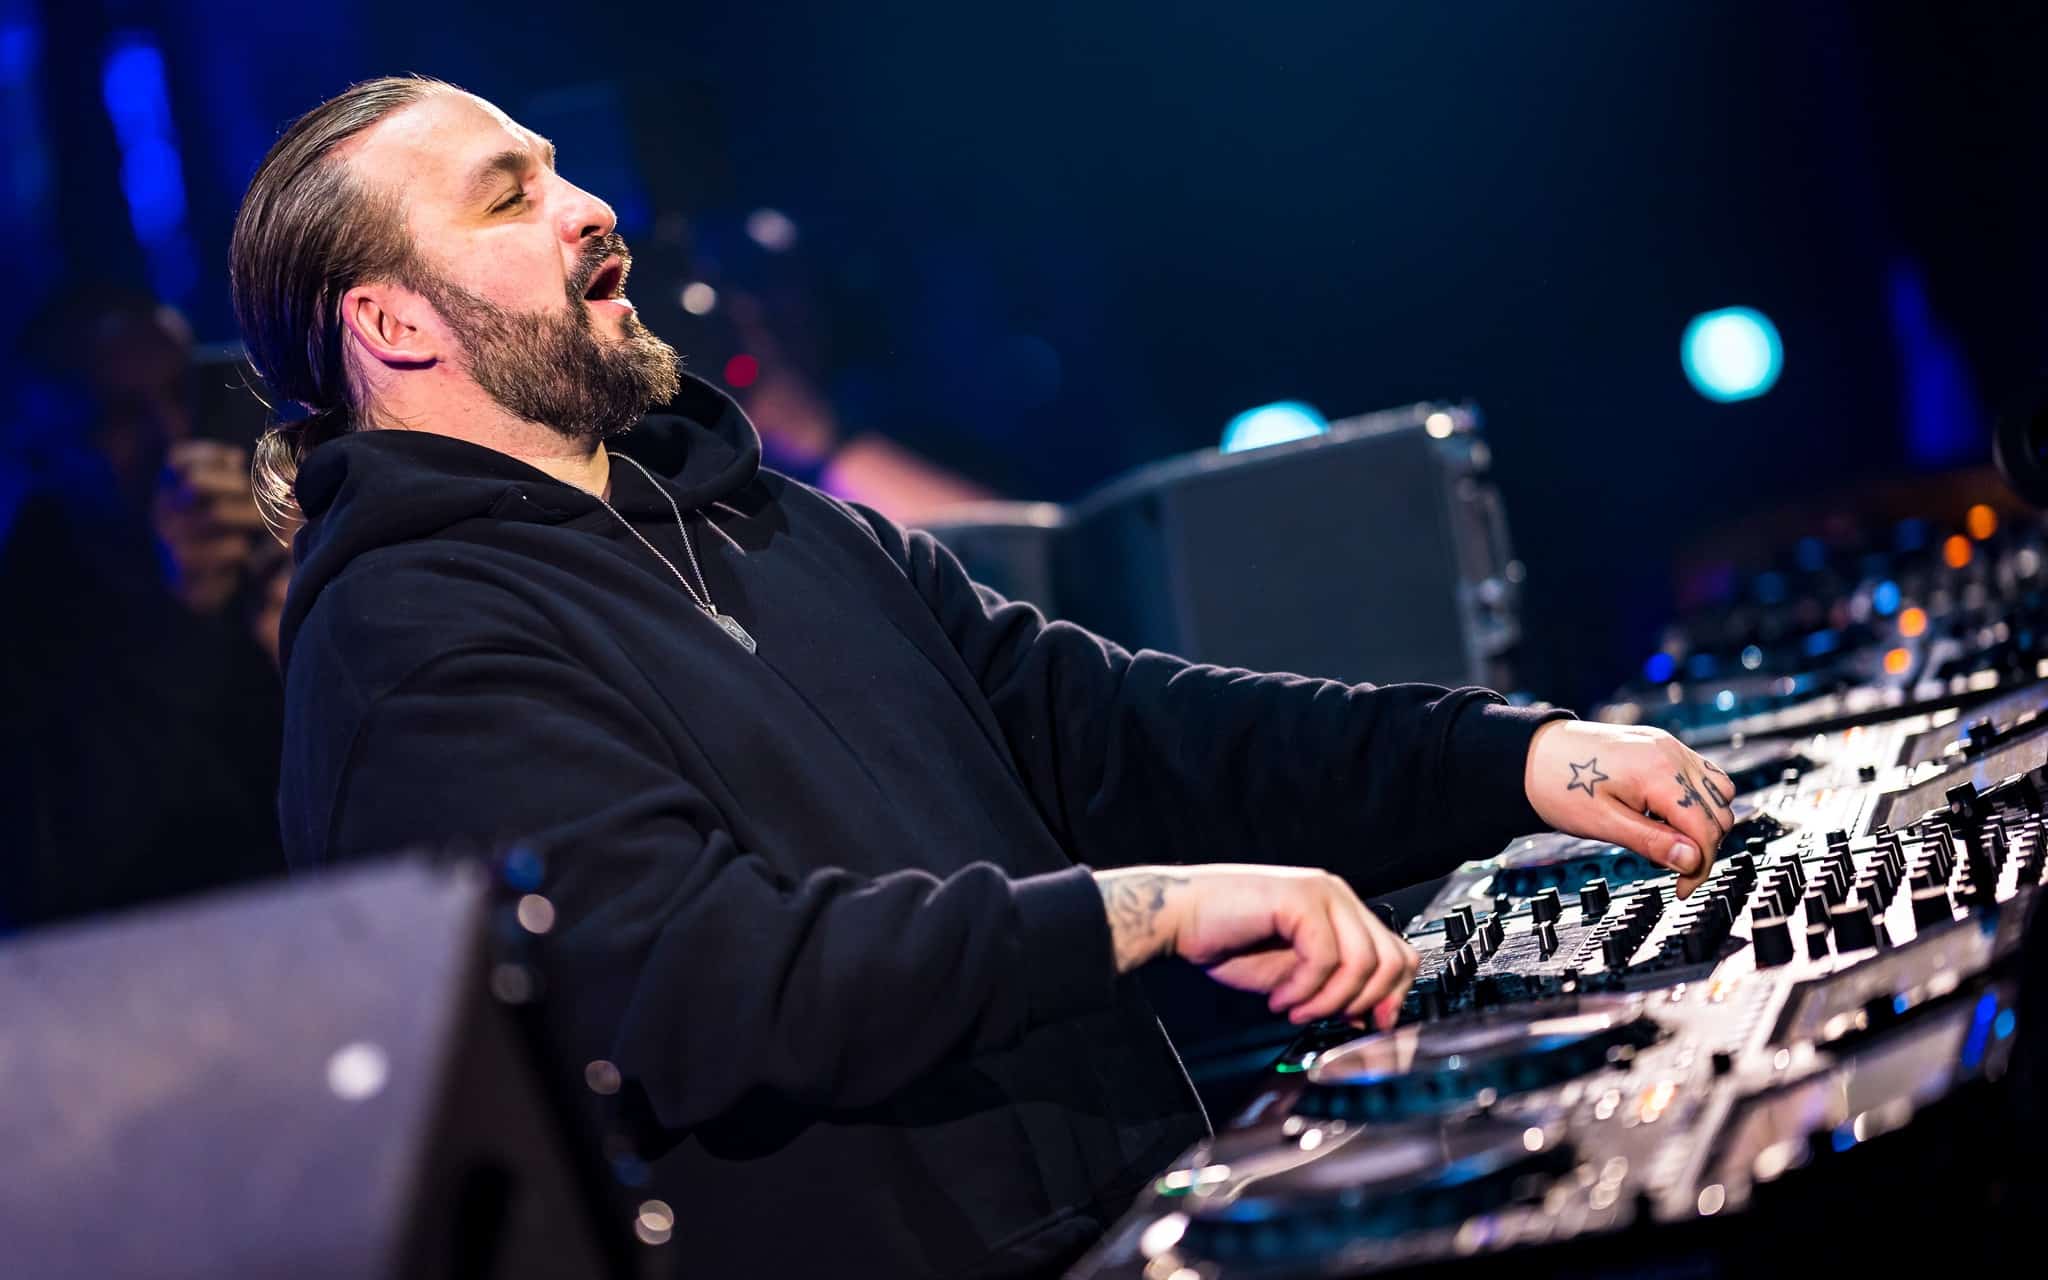 Steve Angello brings the heat with incredible Tomorrowland Winter 2023 set: Watch